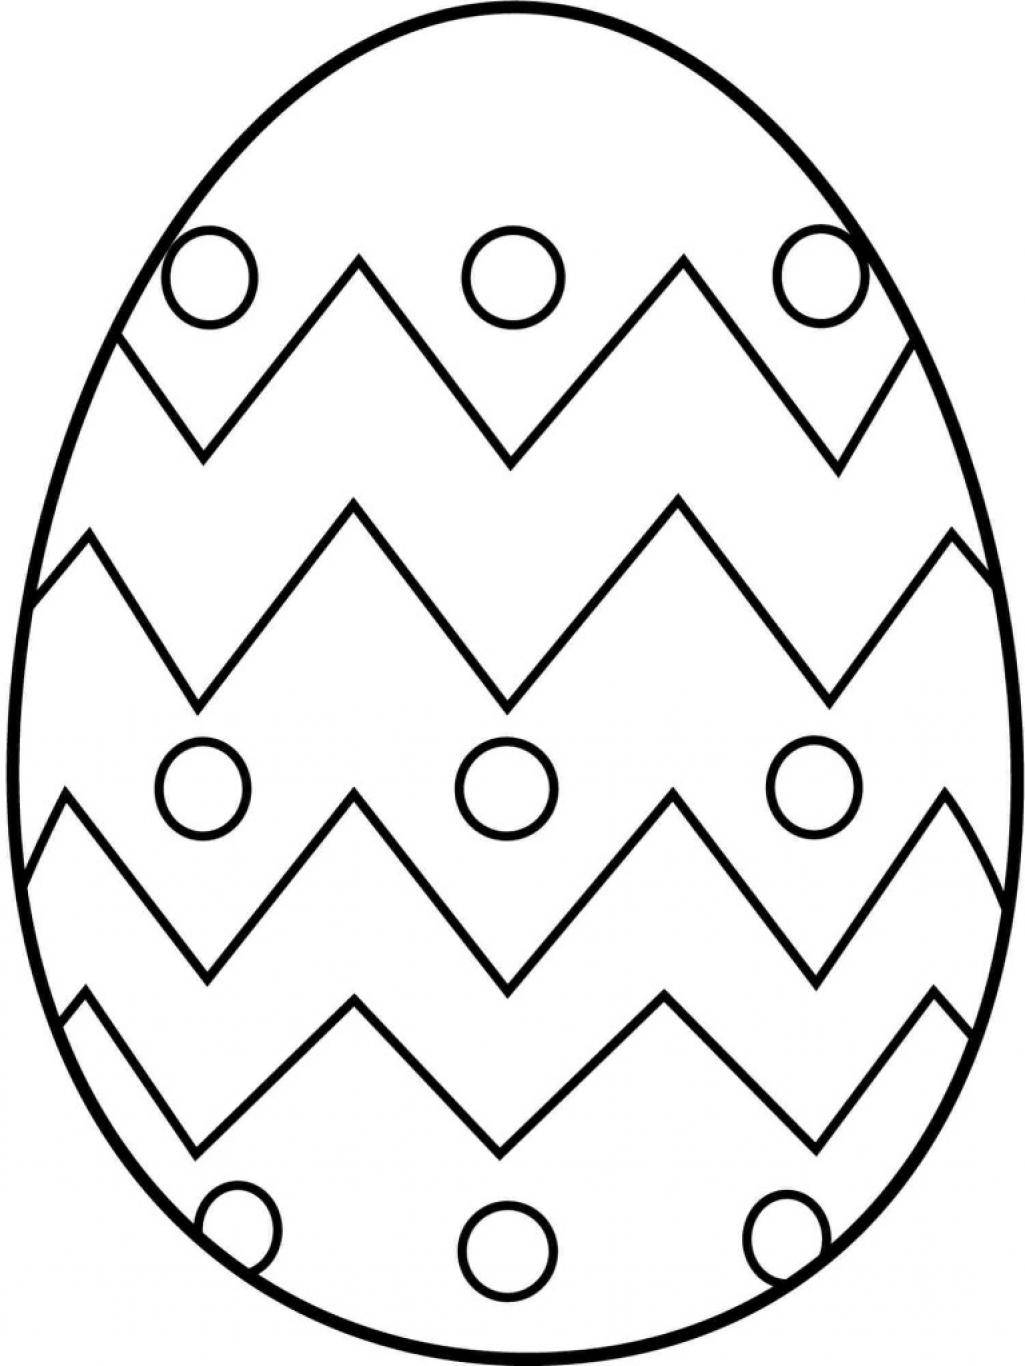 Coloring Egg patterns. Category Patterns for coloring eggs. Tags:  egg patterns.